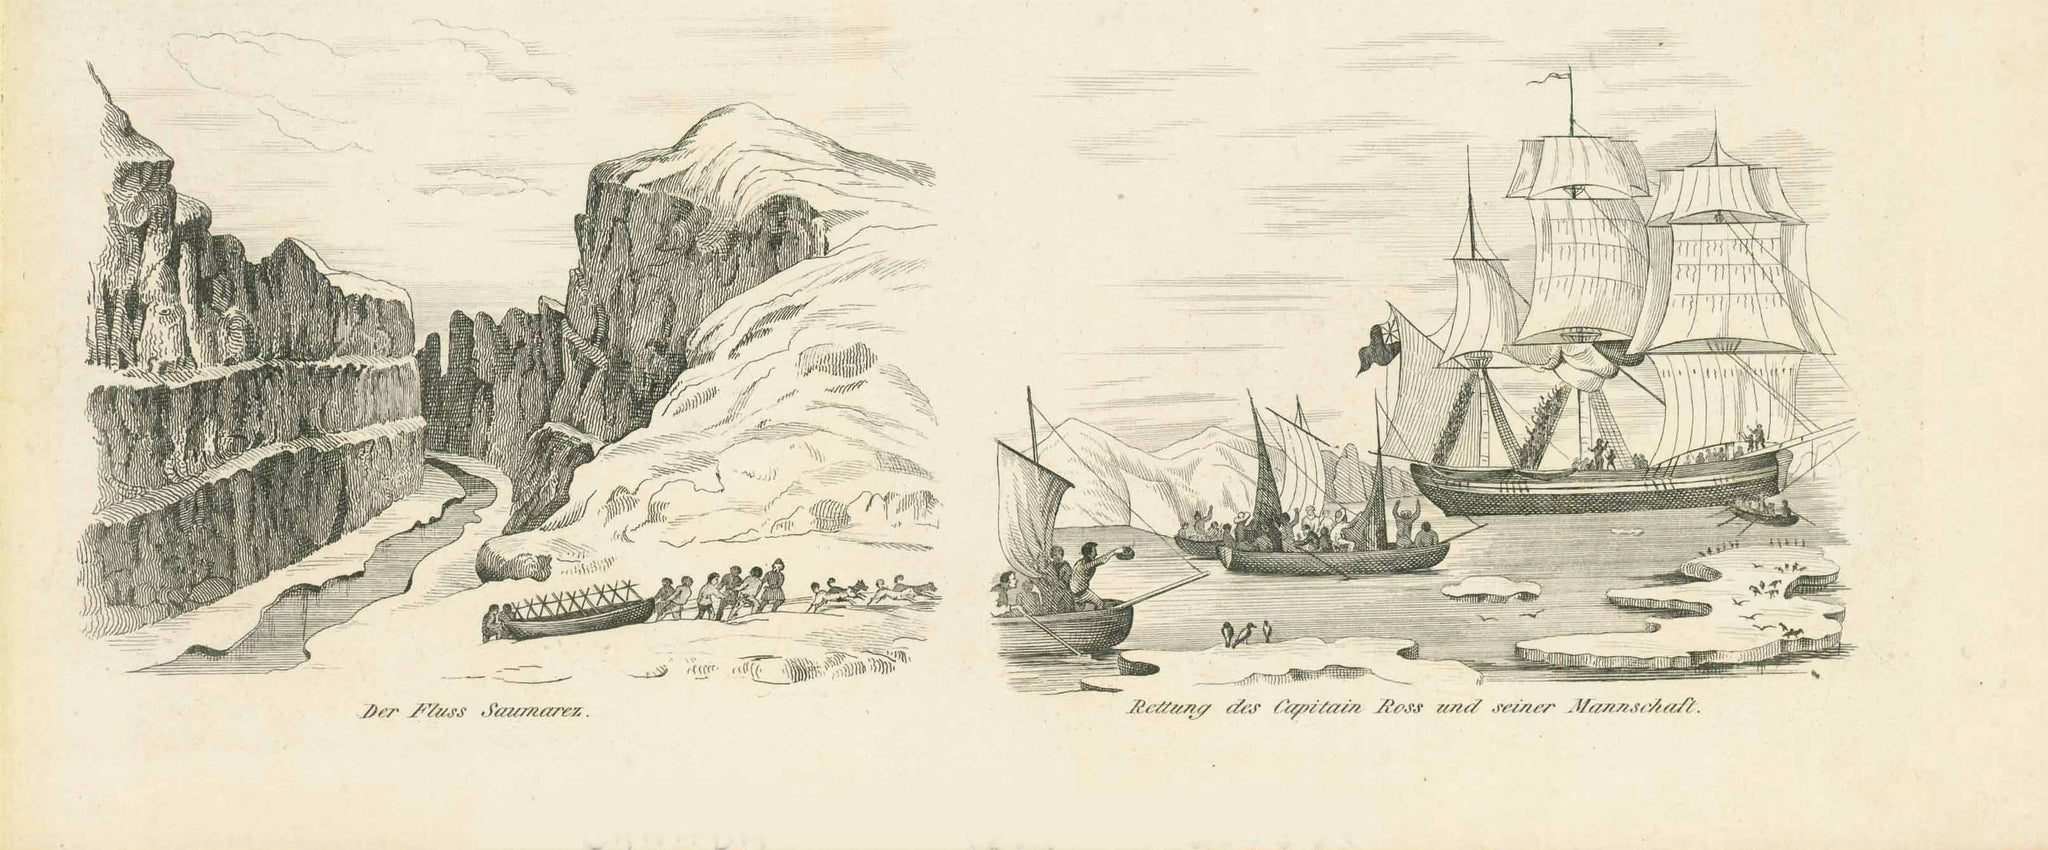 Left image: "Der Fluss Saumarez" (on the Boothie Peninsula) Right image: "Rettung des Capitain Ross und seiner Mannschaft" (saving Capitain Ross and his crew)  Copper etchings published 1837.